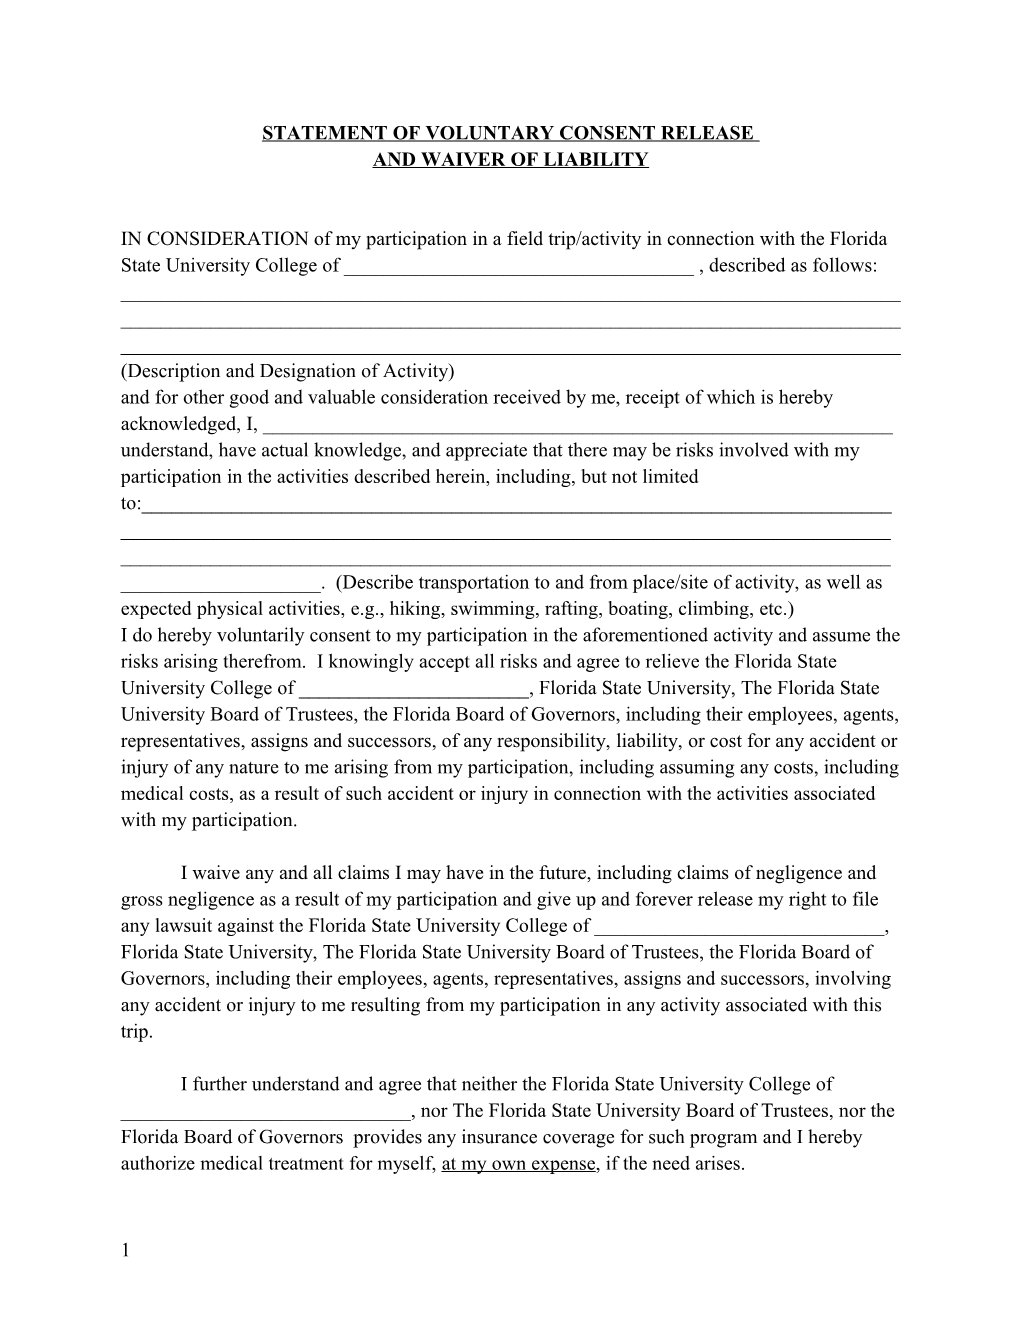 Statement of Voluntary Consent Release